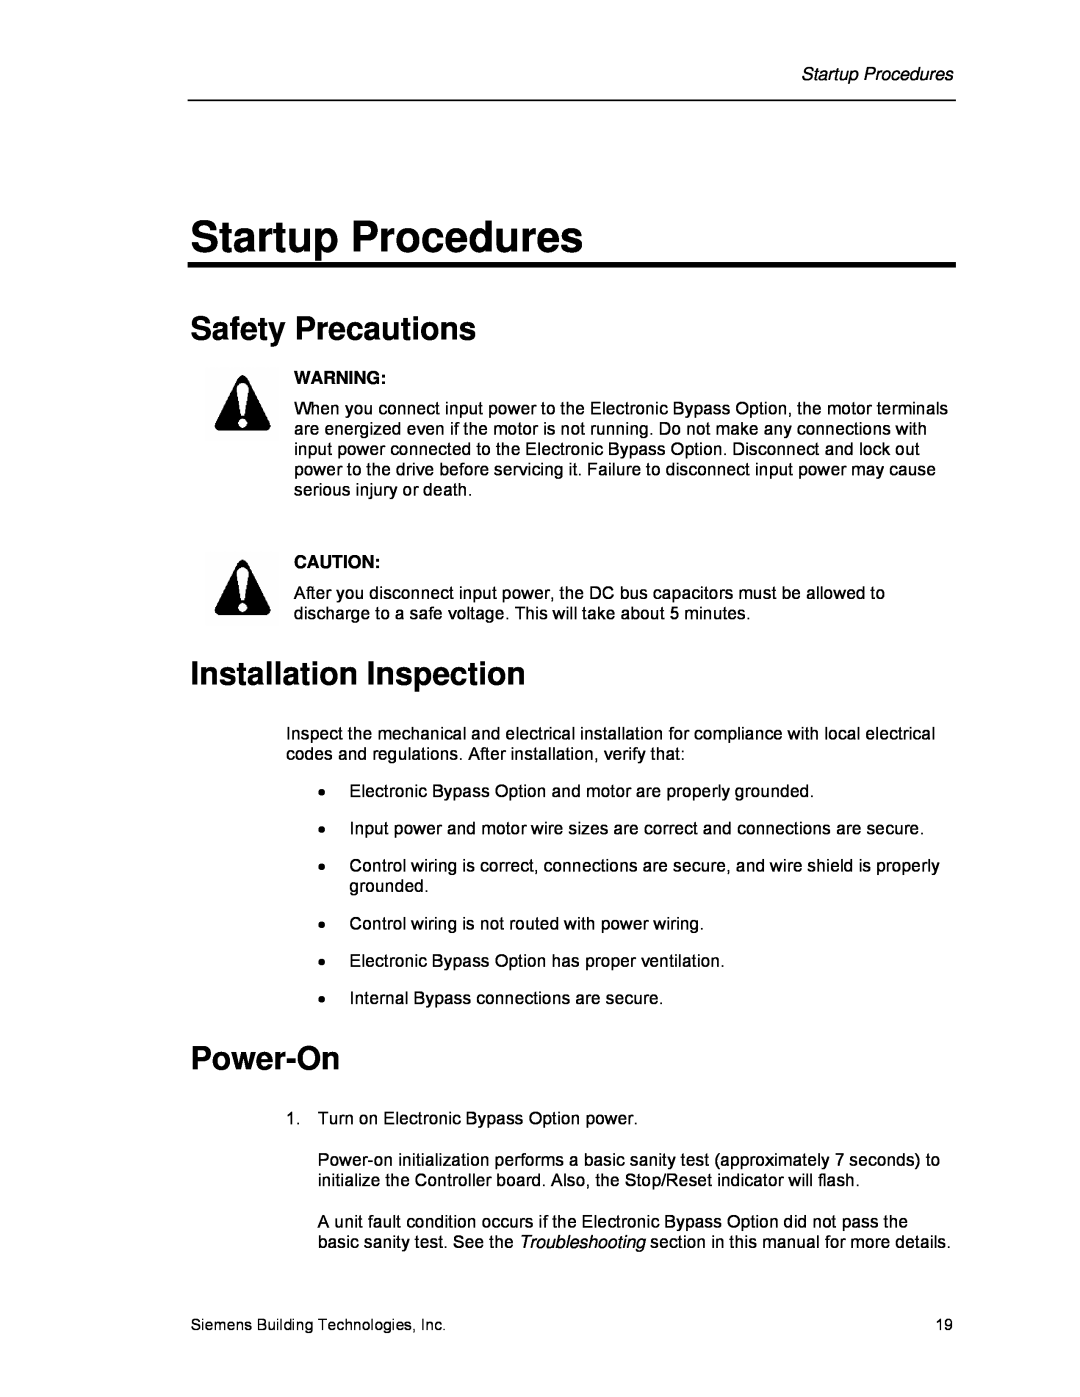 Siemens 125-3208 operating instructions Startup Procedures, Safety Precautions, Installation Inspection, Power-On 